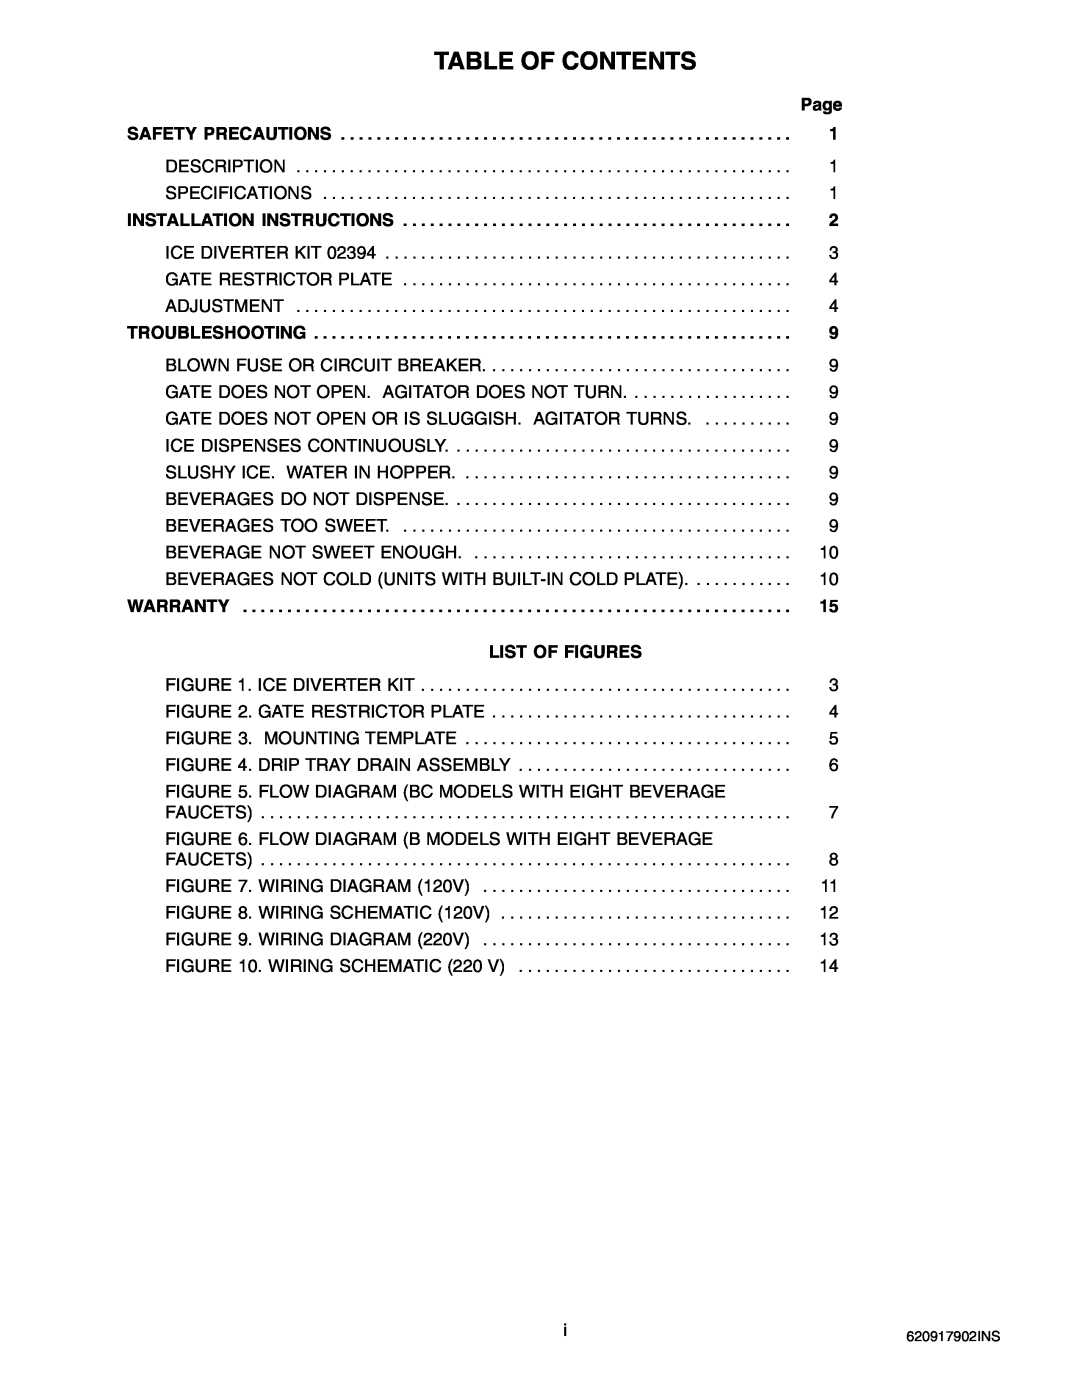 Cornelius ENDURO-175 installation manual Table Of Contents, Page, List Of Figures 